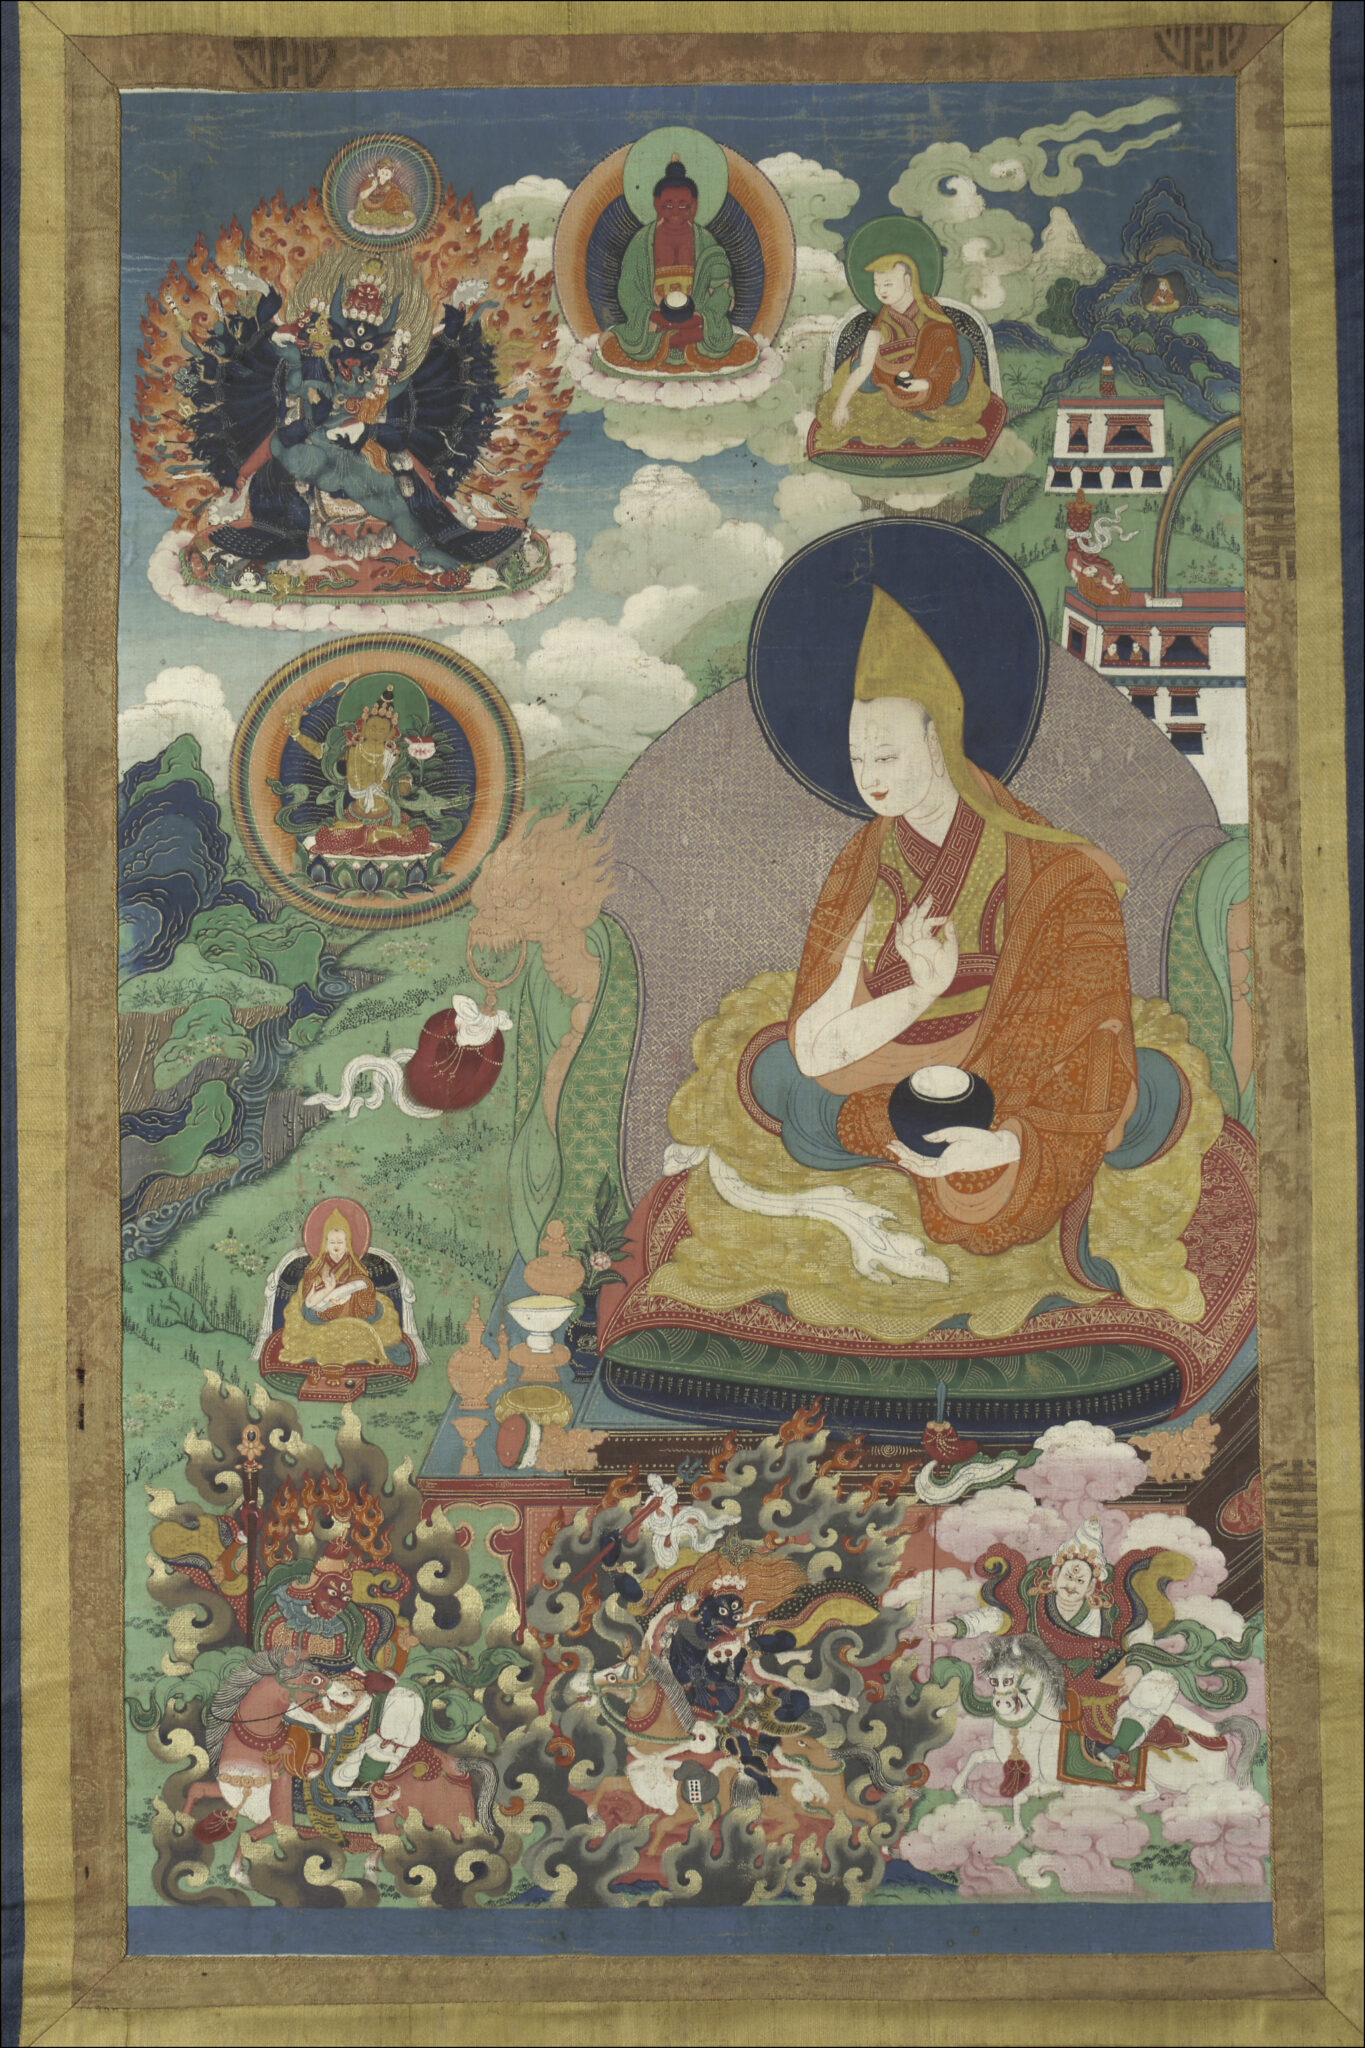 Lama enthroned outside of building complex on mountain spur, surrounded by deity and lama portraits